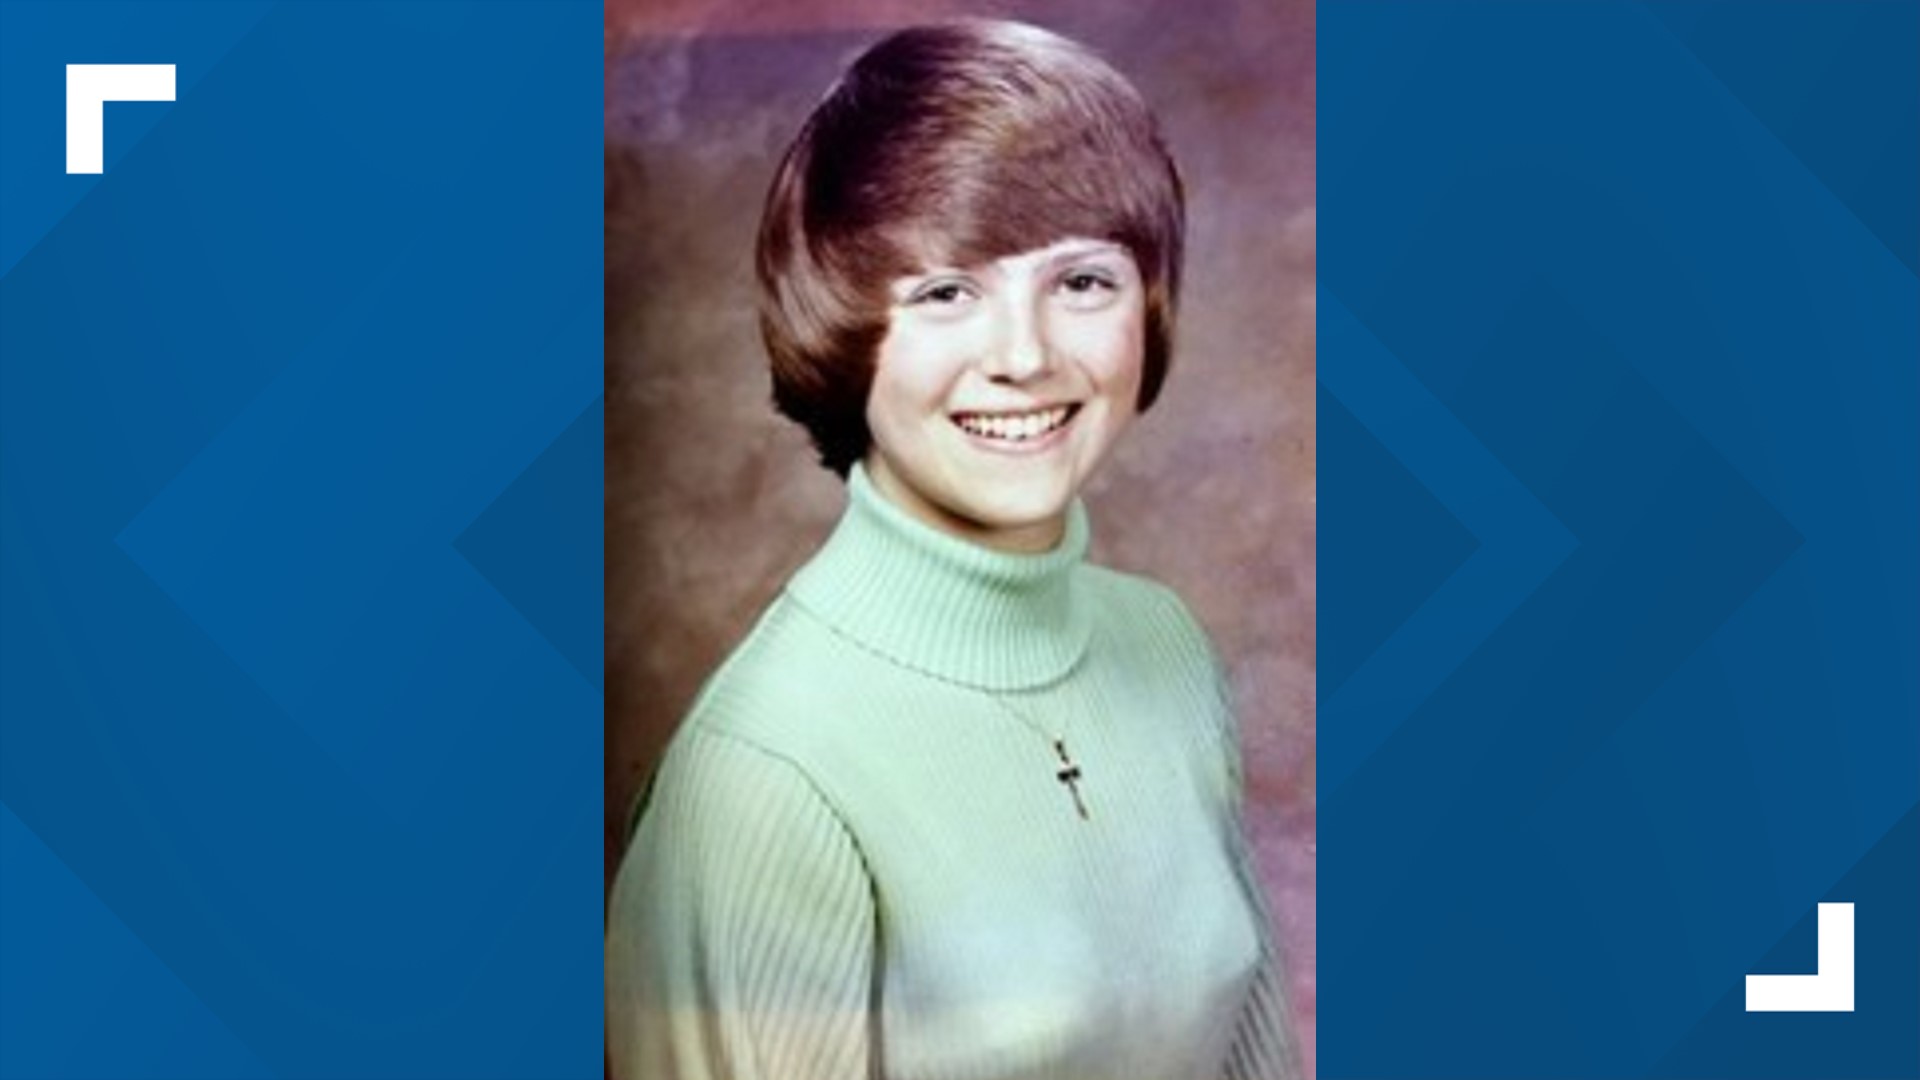 Ann Harmeier was 20 years old and returning to IU when her car stalled on State Highway 37 near Martinsville. She was found dead five weeks later.